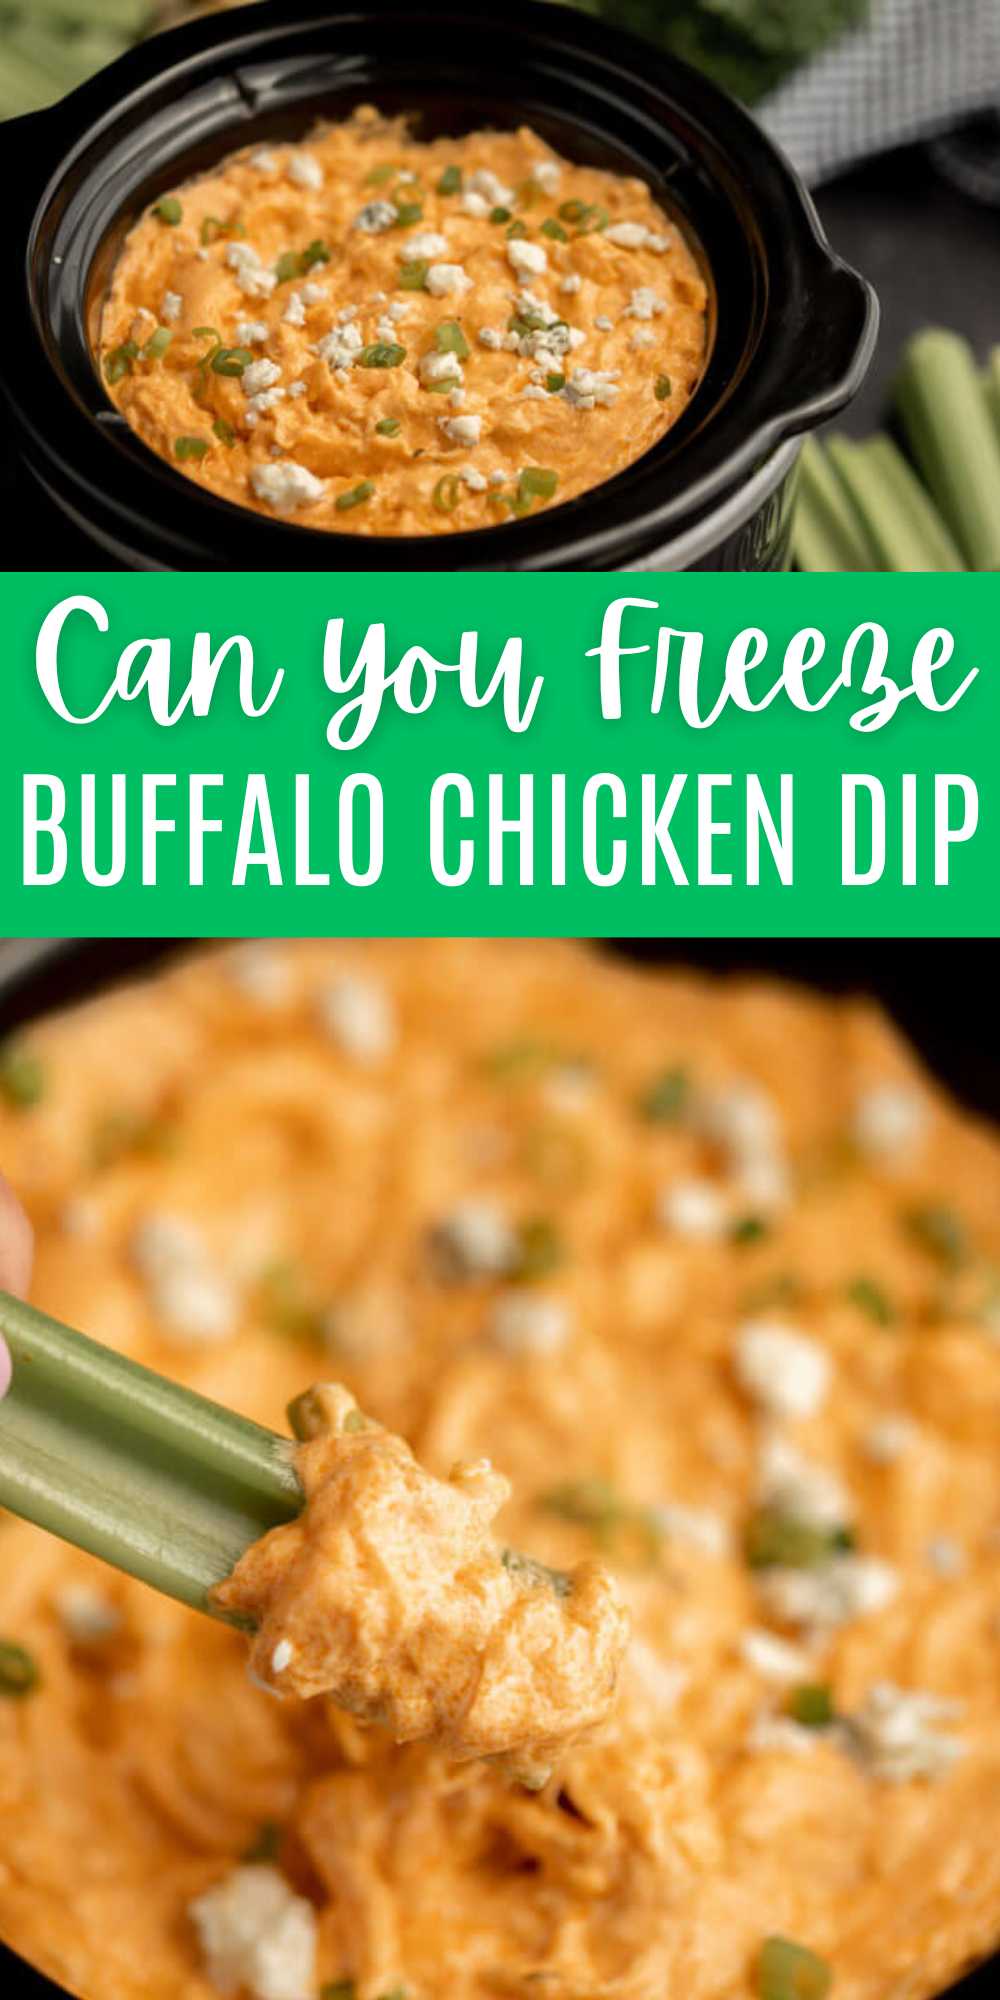 If you are wondering, can you freeze buffalo chicken dip then these steps will help. Learn these easy freezer steps and storing options. The balance of flavors, textures, and heat makes it a crowd-pleasing appetizer or party snack. That’s why it’s great having an instant buffalo chicken dip. #eatingonadime #canyoufreezebuffalochickendip #buffalochickendip